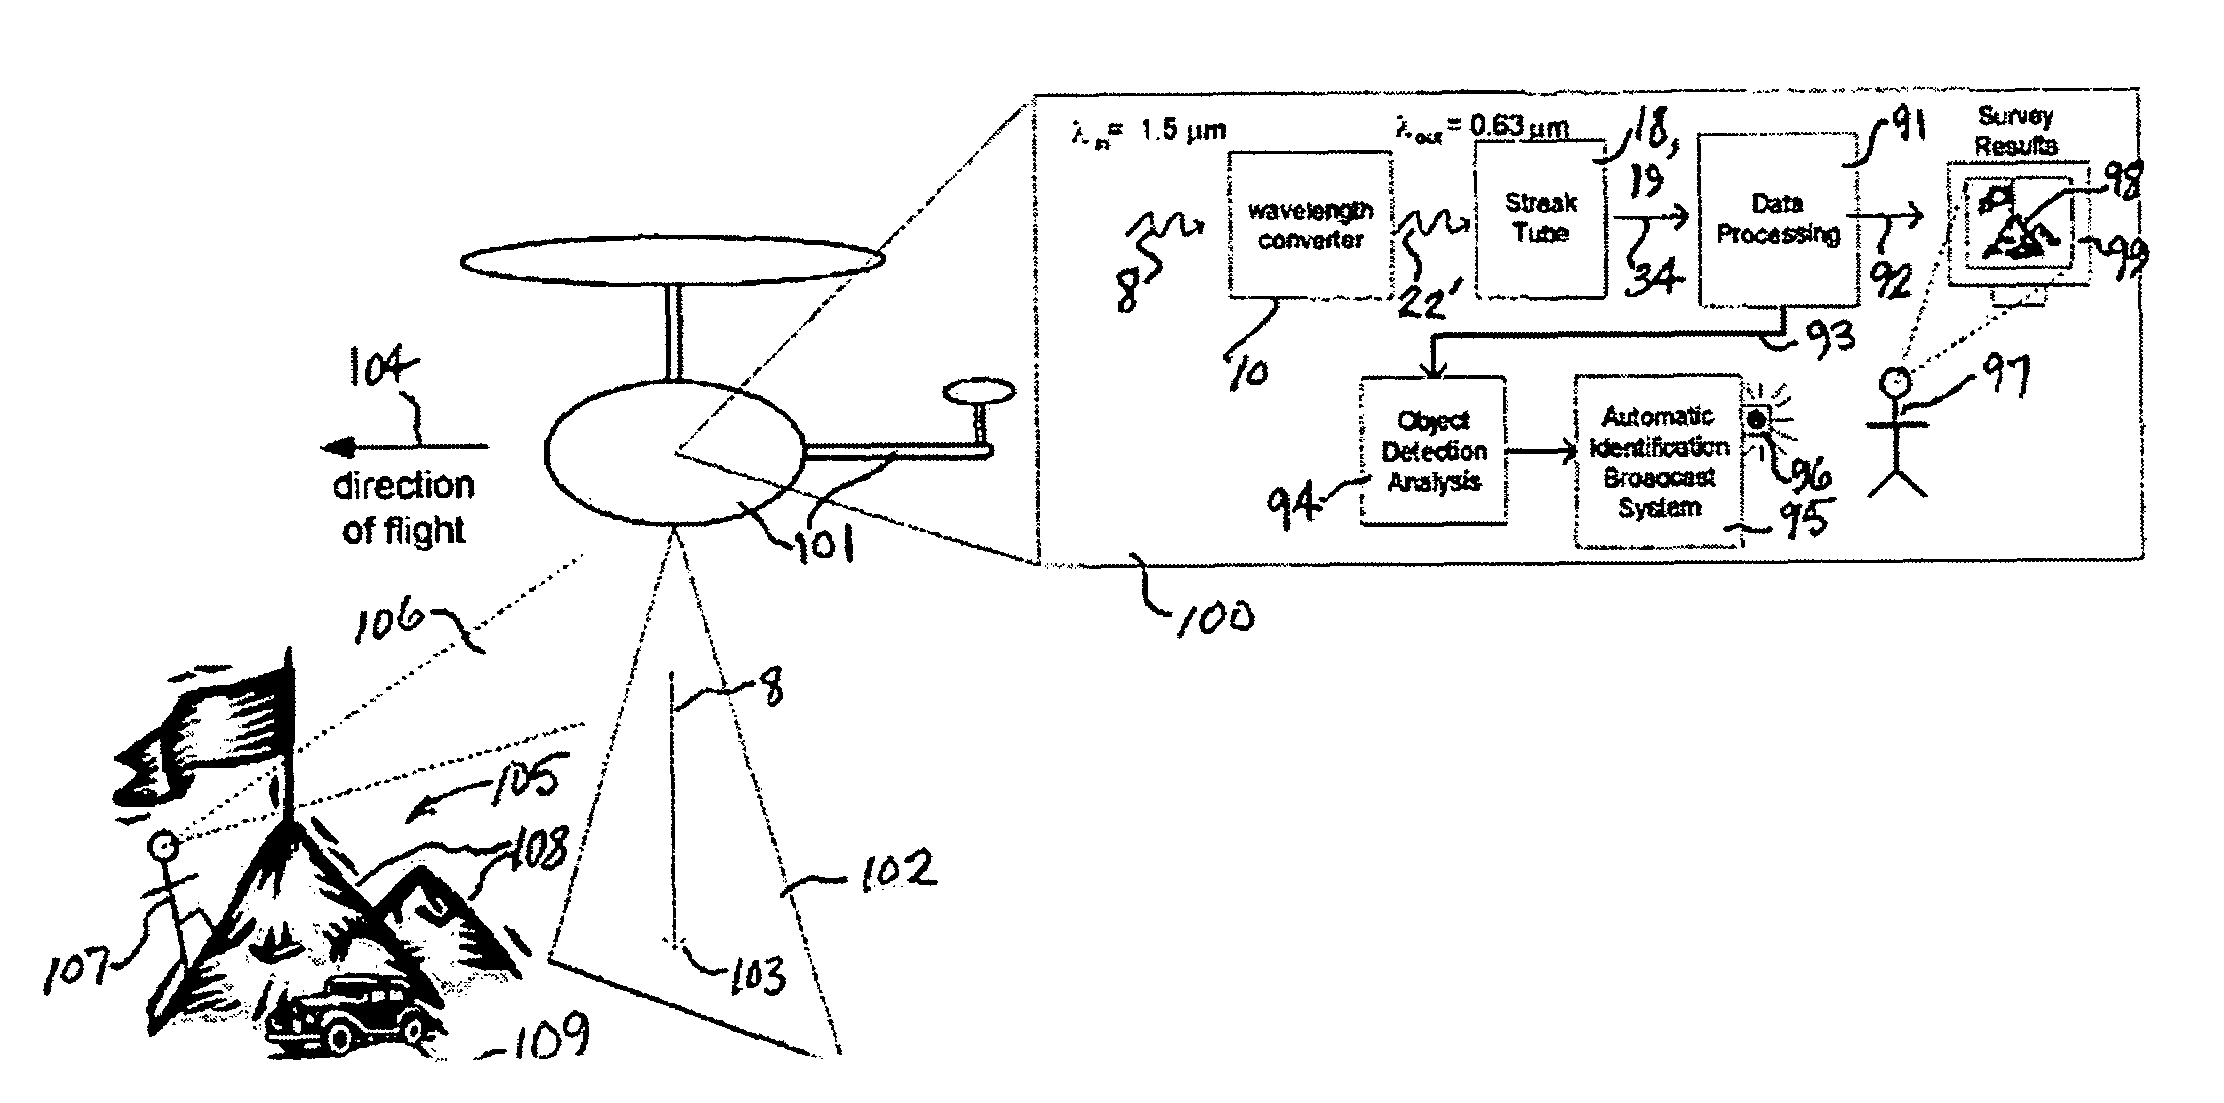 Ultraviolet, infrared, and near-infrared lidar system and method